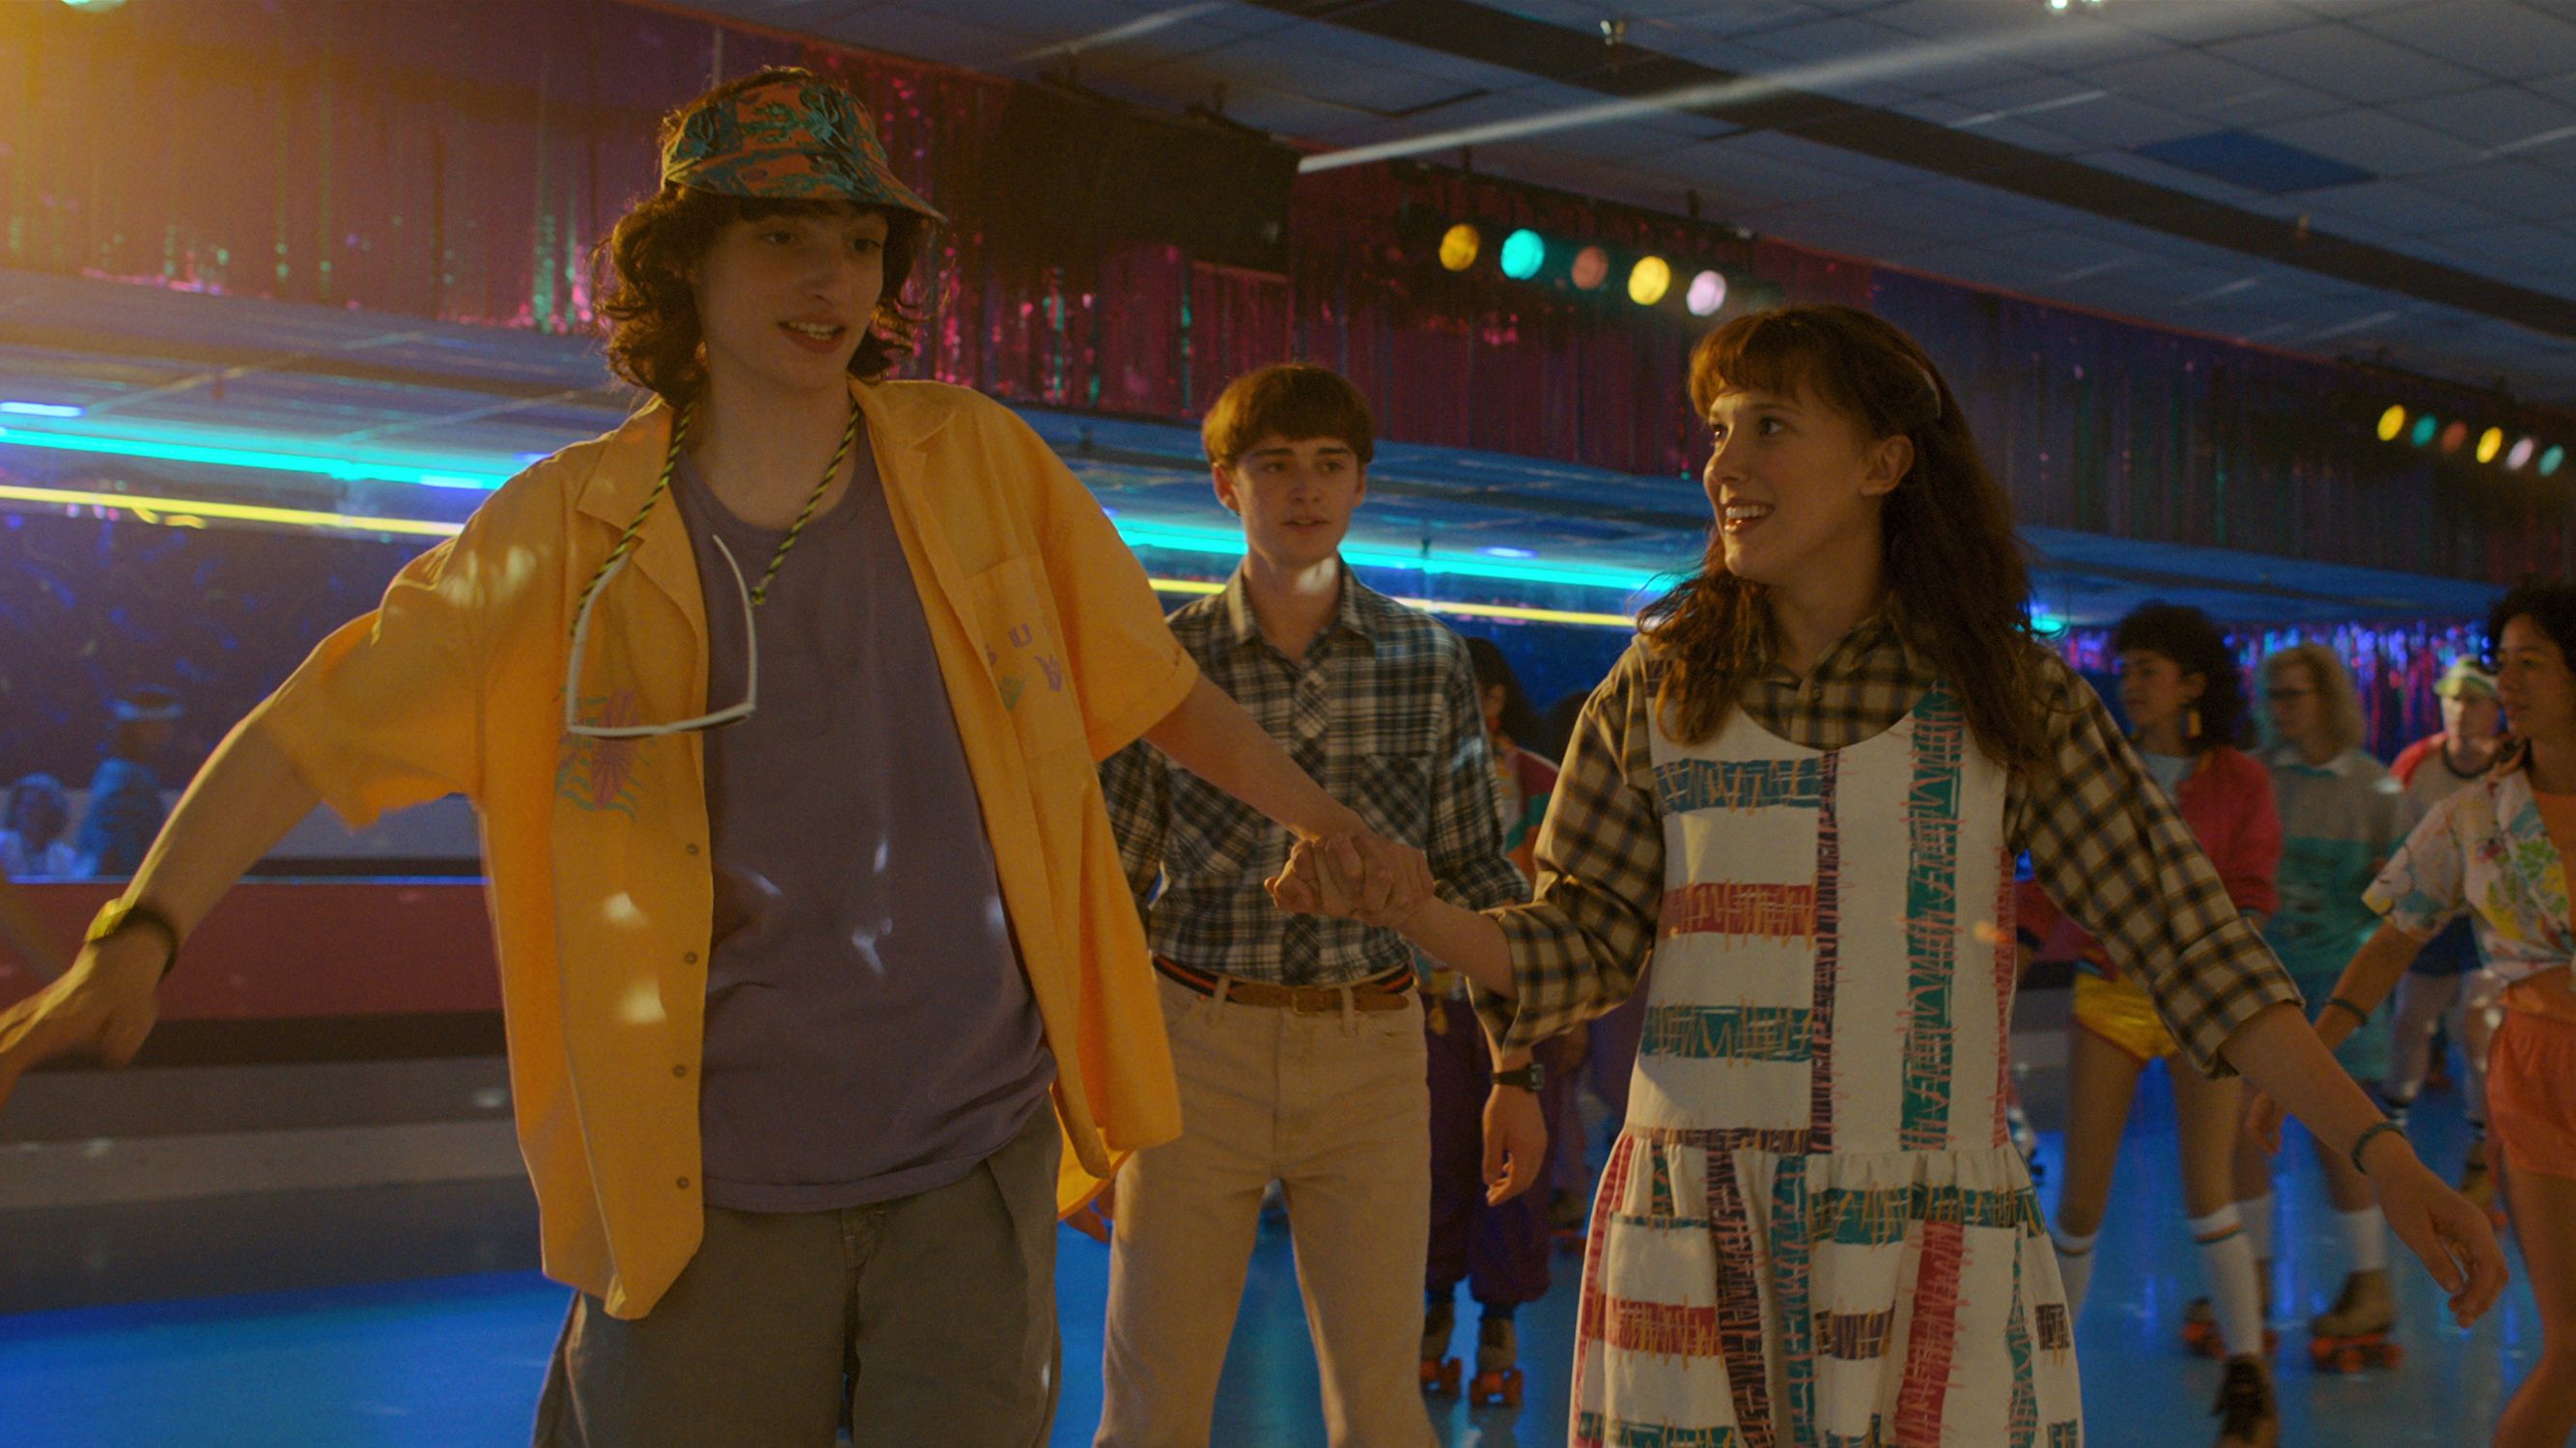 Where Did El and Will Move to In Stranger Things Season 3?